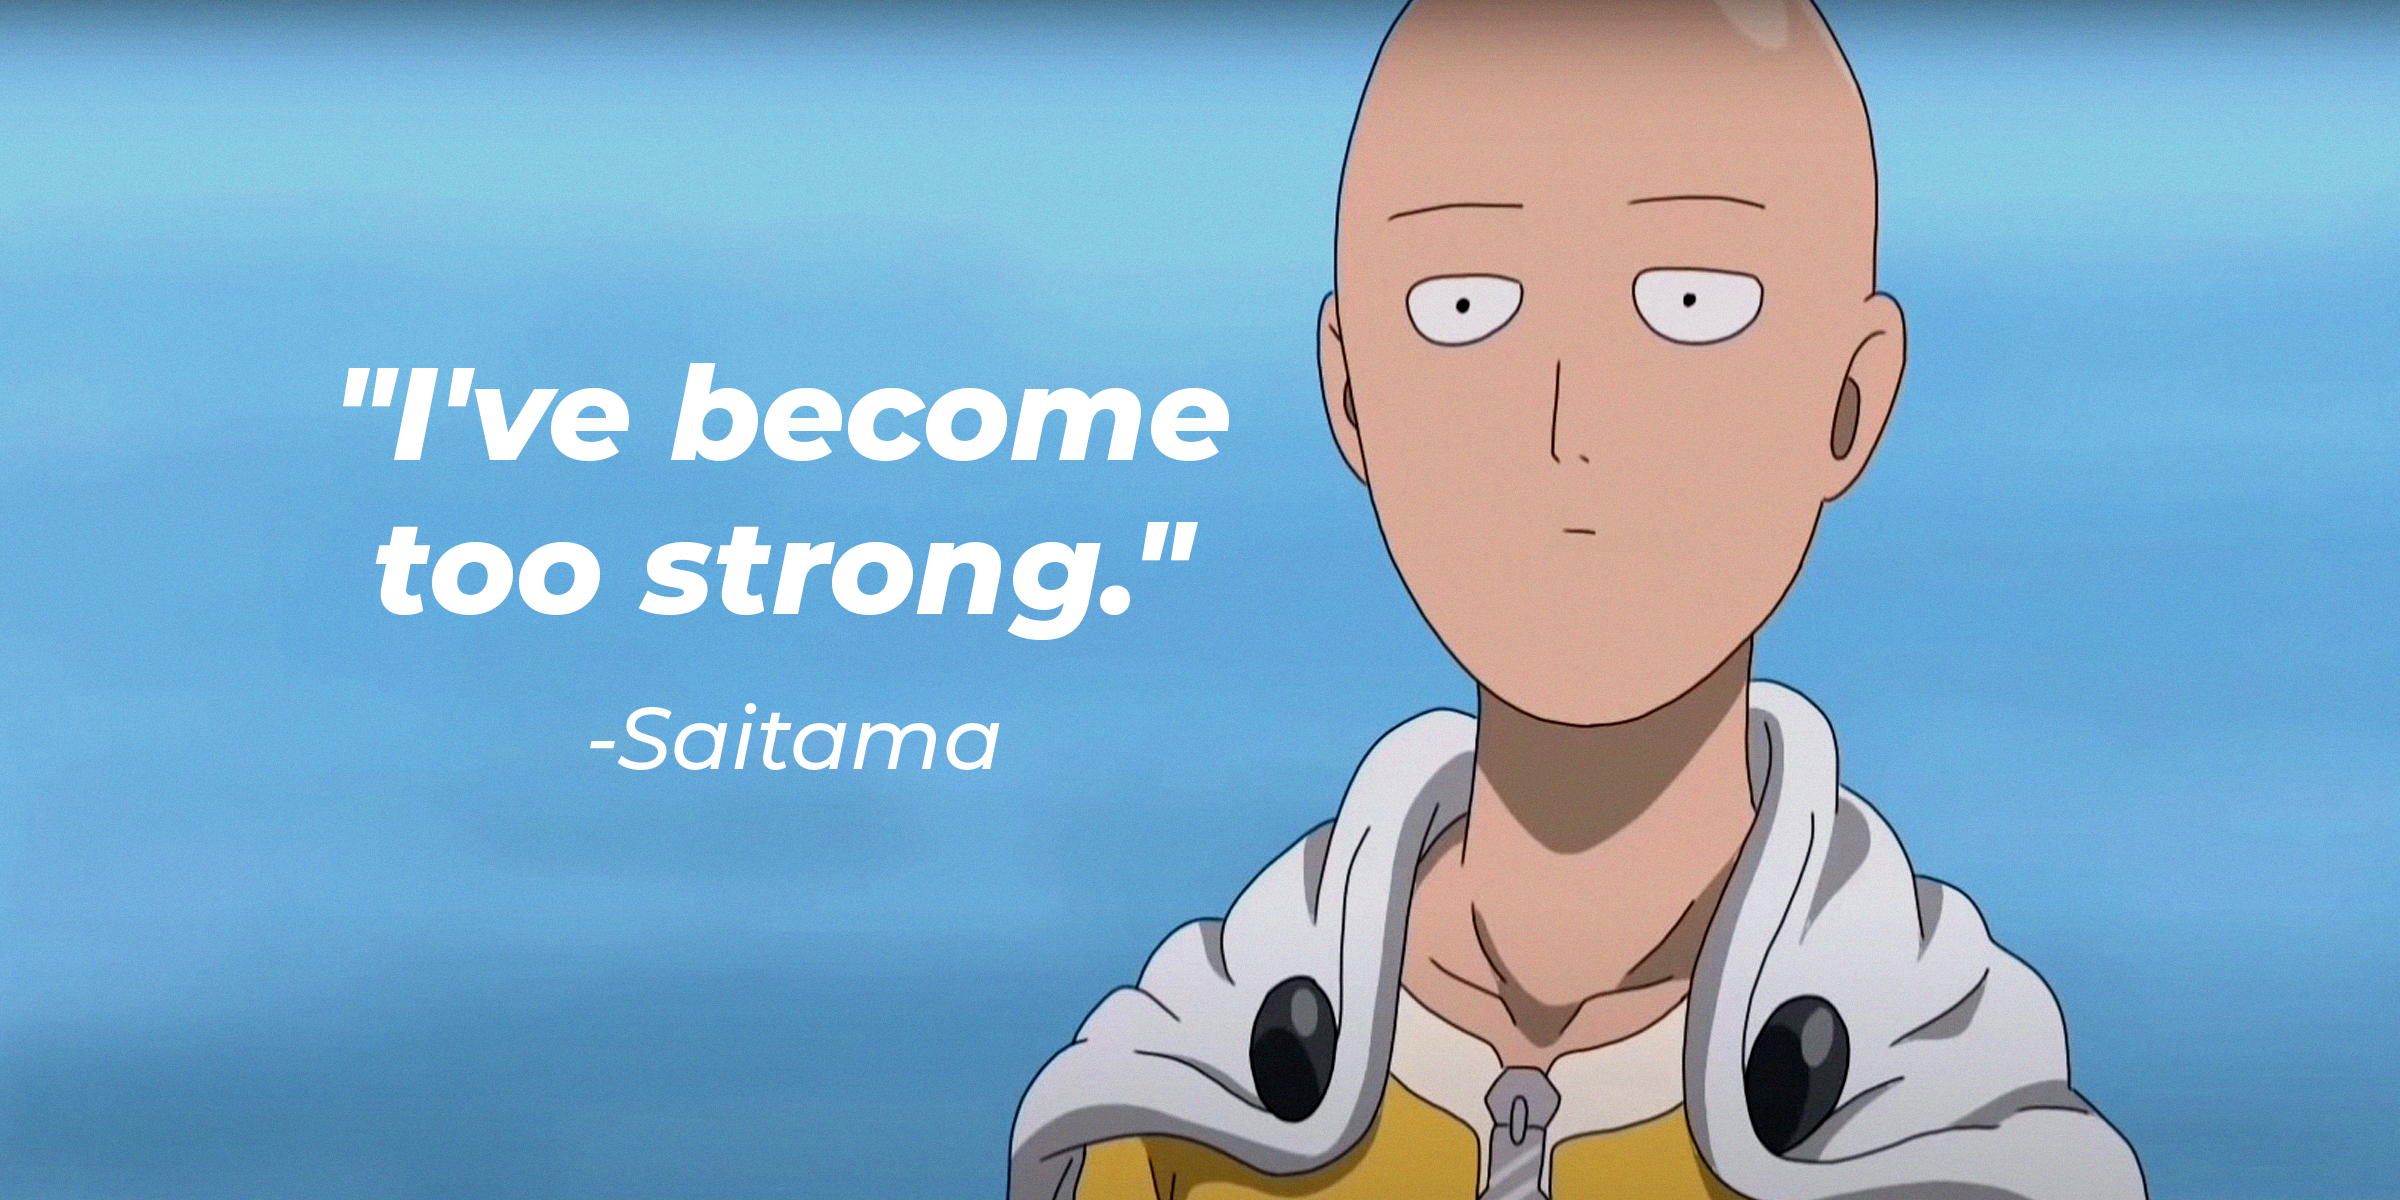 Photo of Saitama with his quote: "I've become too strong." | Source: Facebook.com/OnePunchManMobileSEAEN